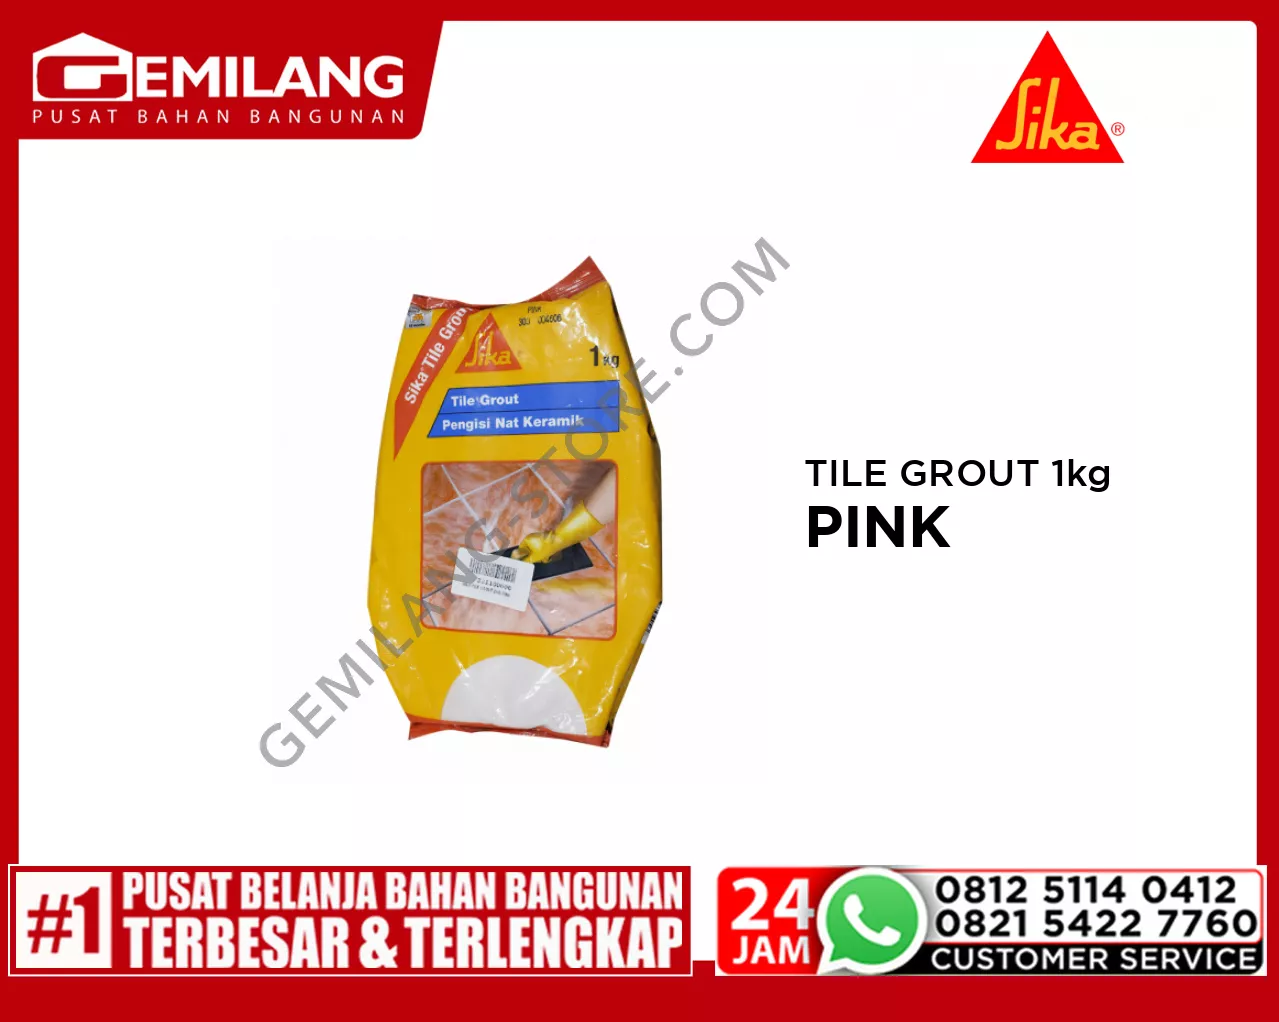 SIKA TILE GROUT PINK 1kg